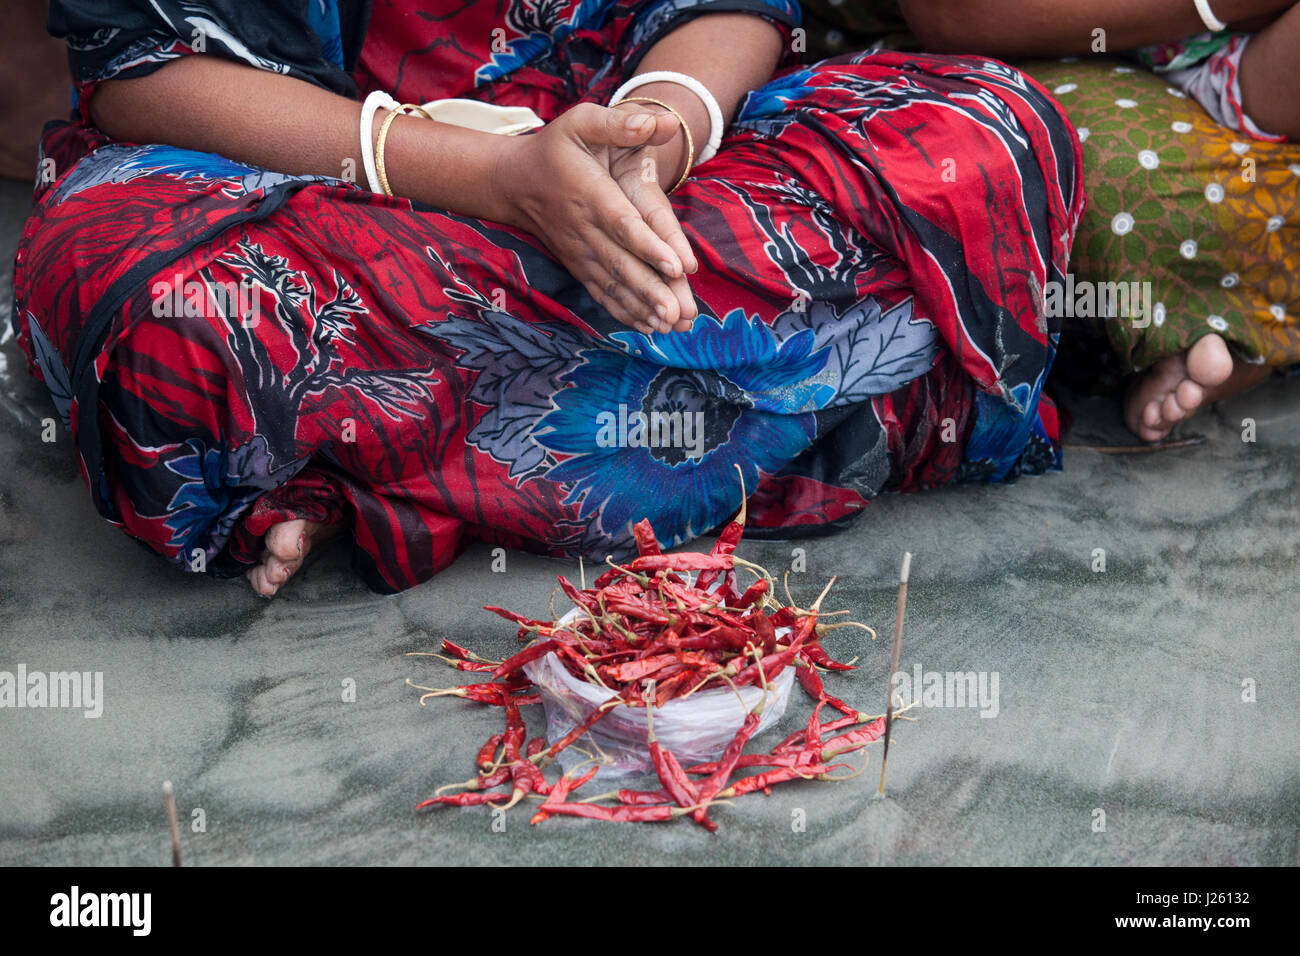 People from the Hindu community offer Morning Prayer at the shore of the Bay of Bengal during the Rash Mela at Dublarchar in the Eastern Division of S Stock Photo